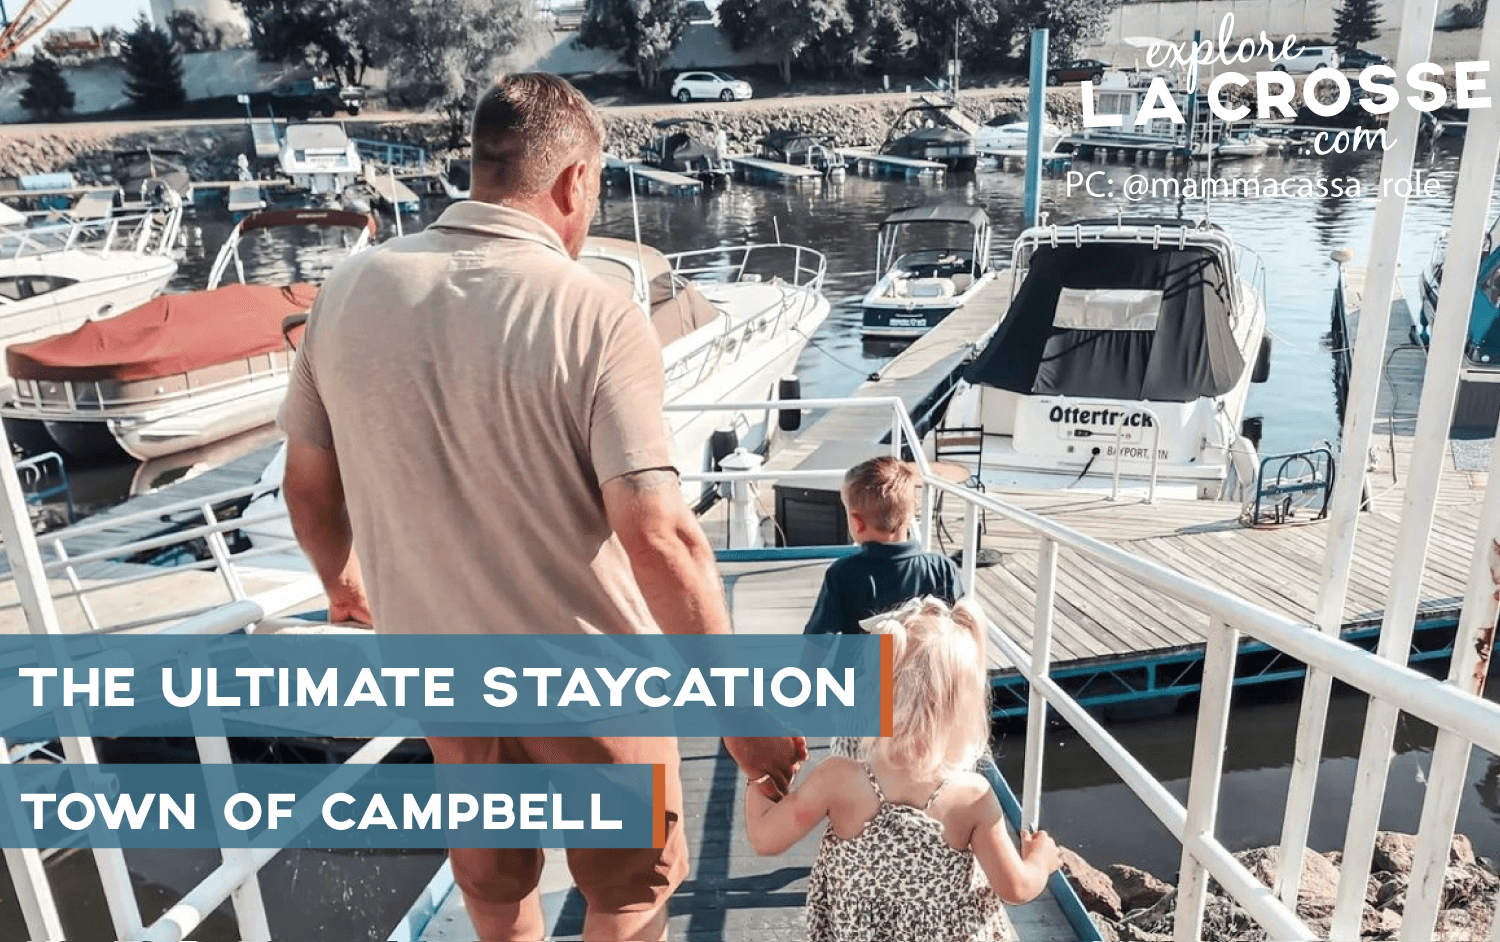 townofcampbell-statycation